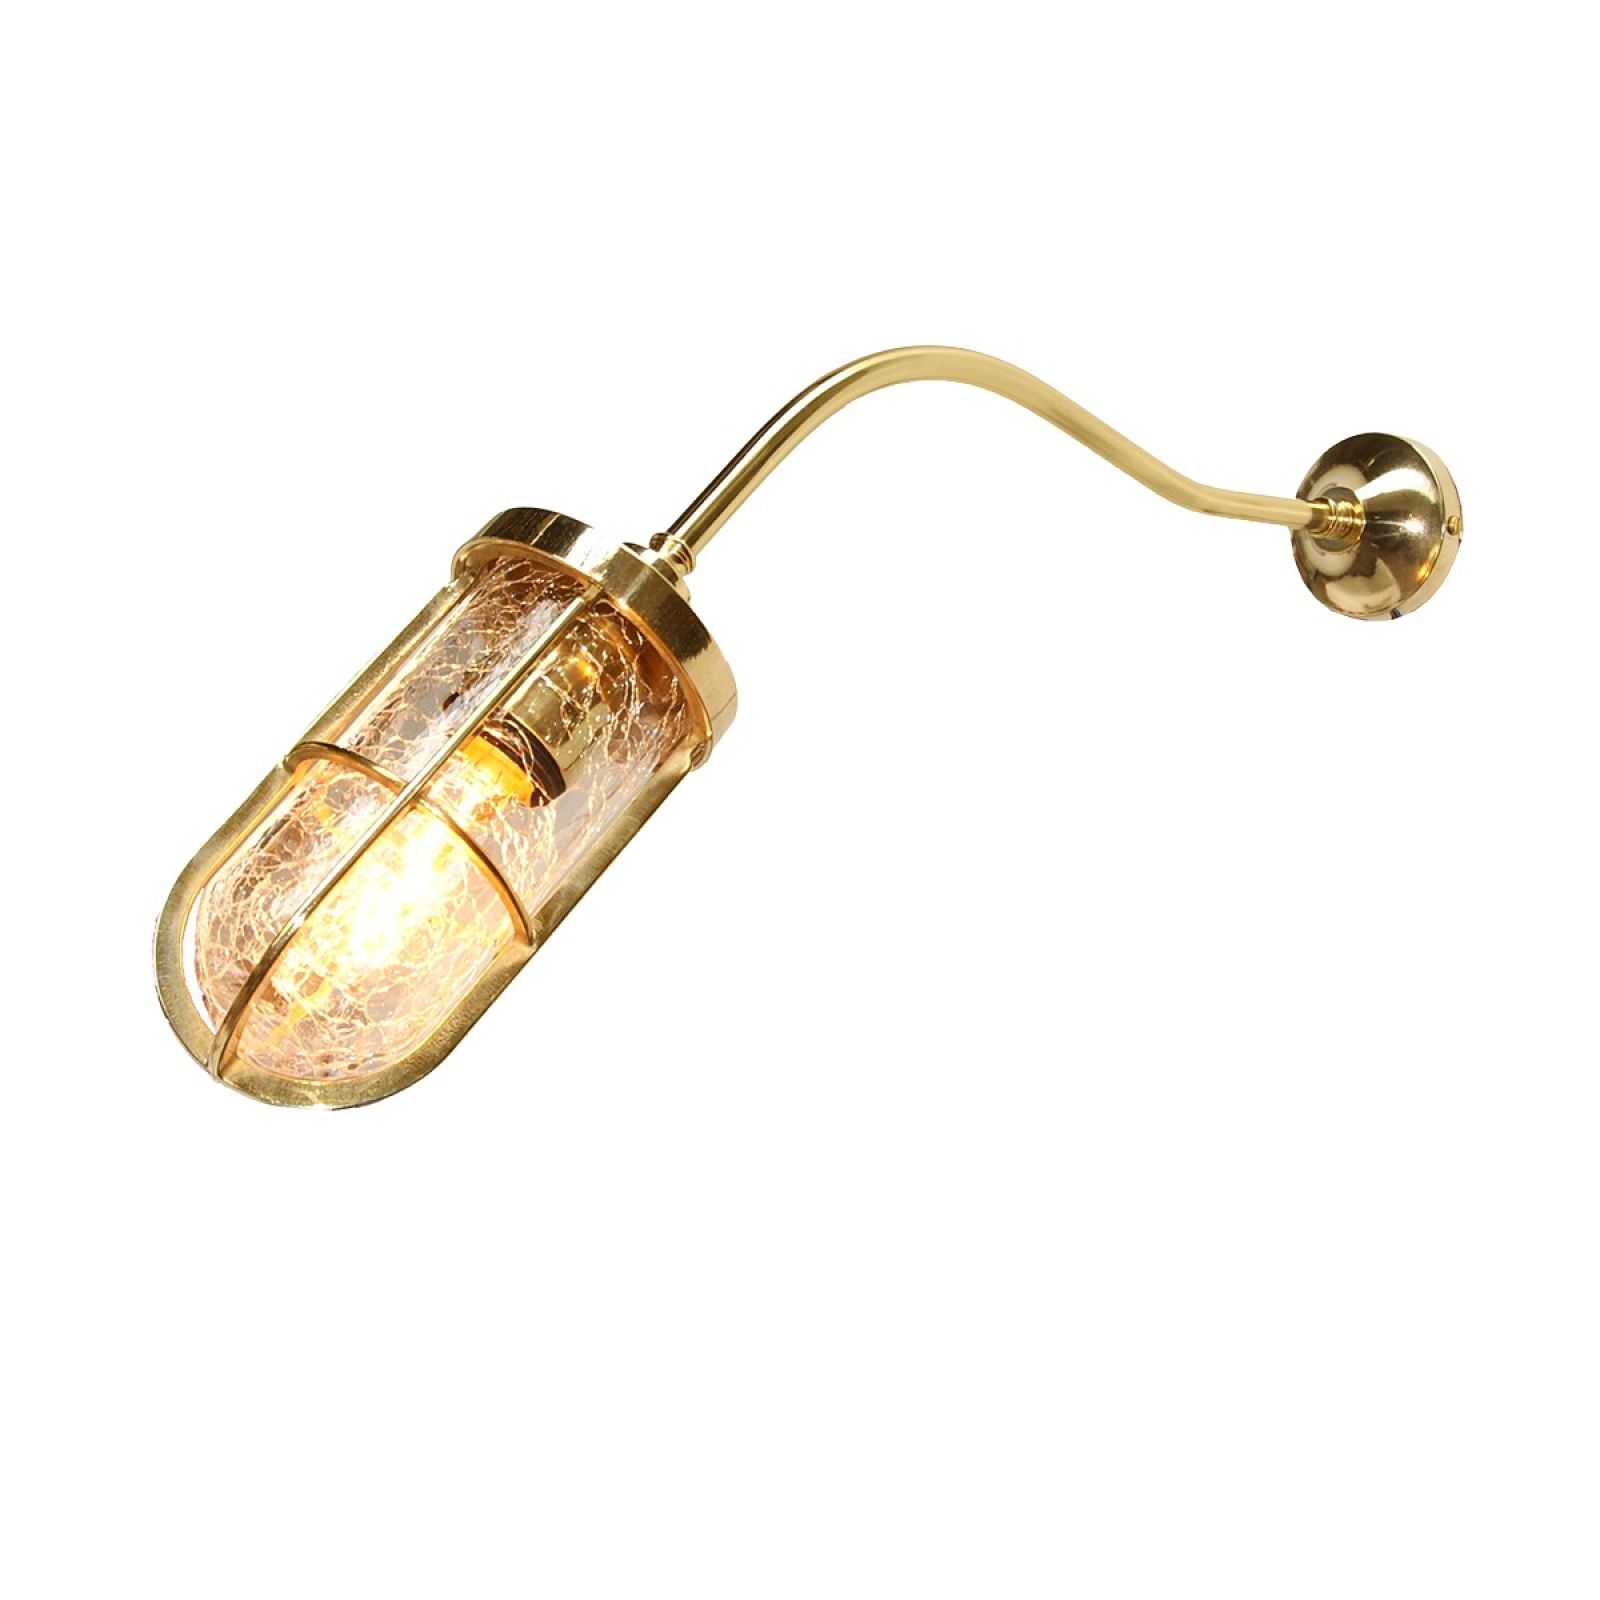 Wyber Cage Wall Light